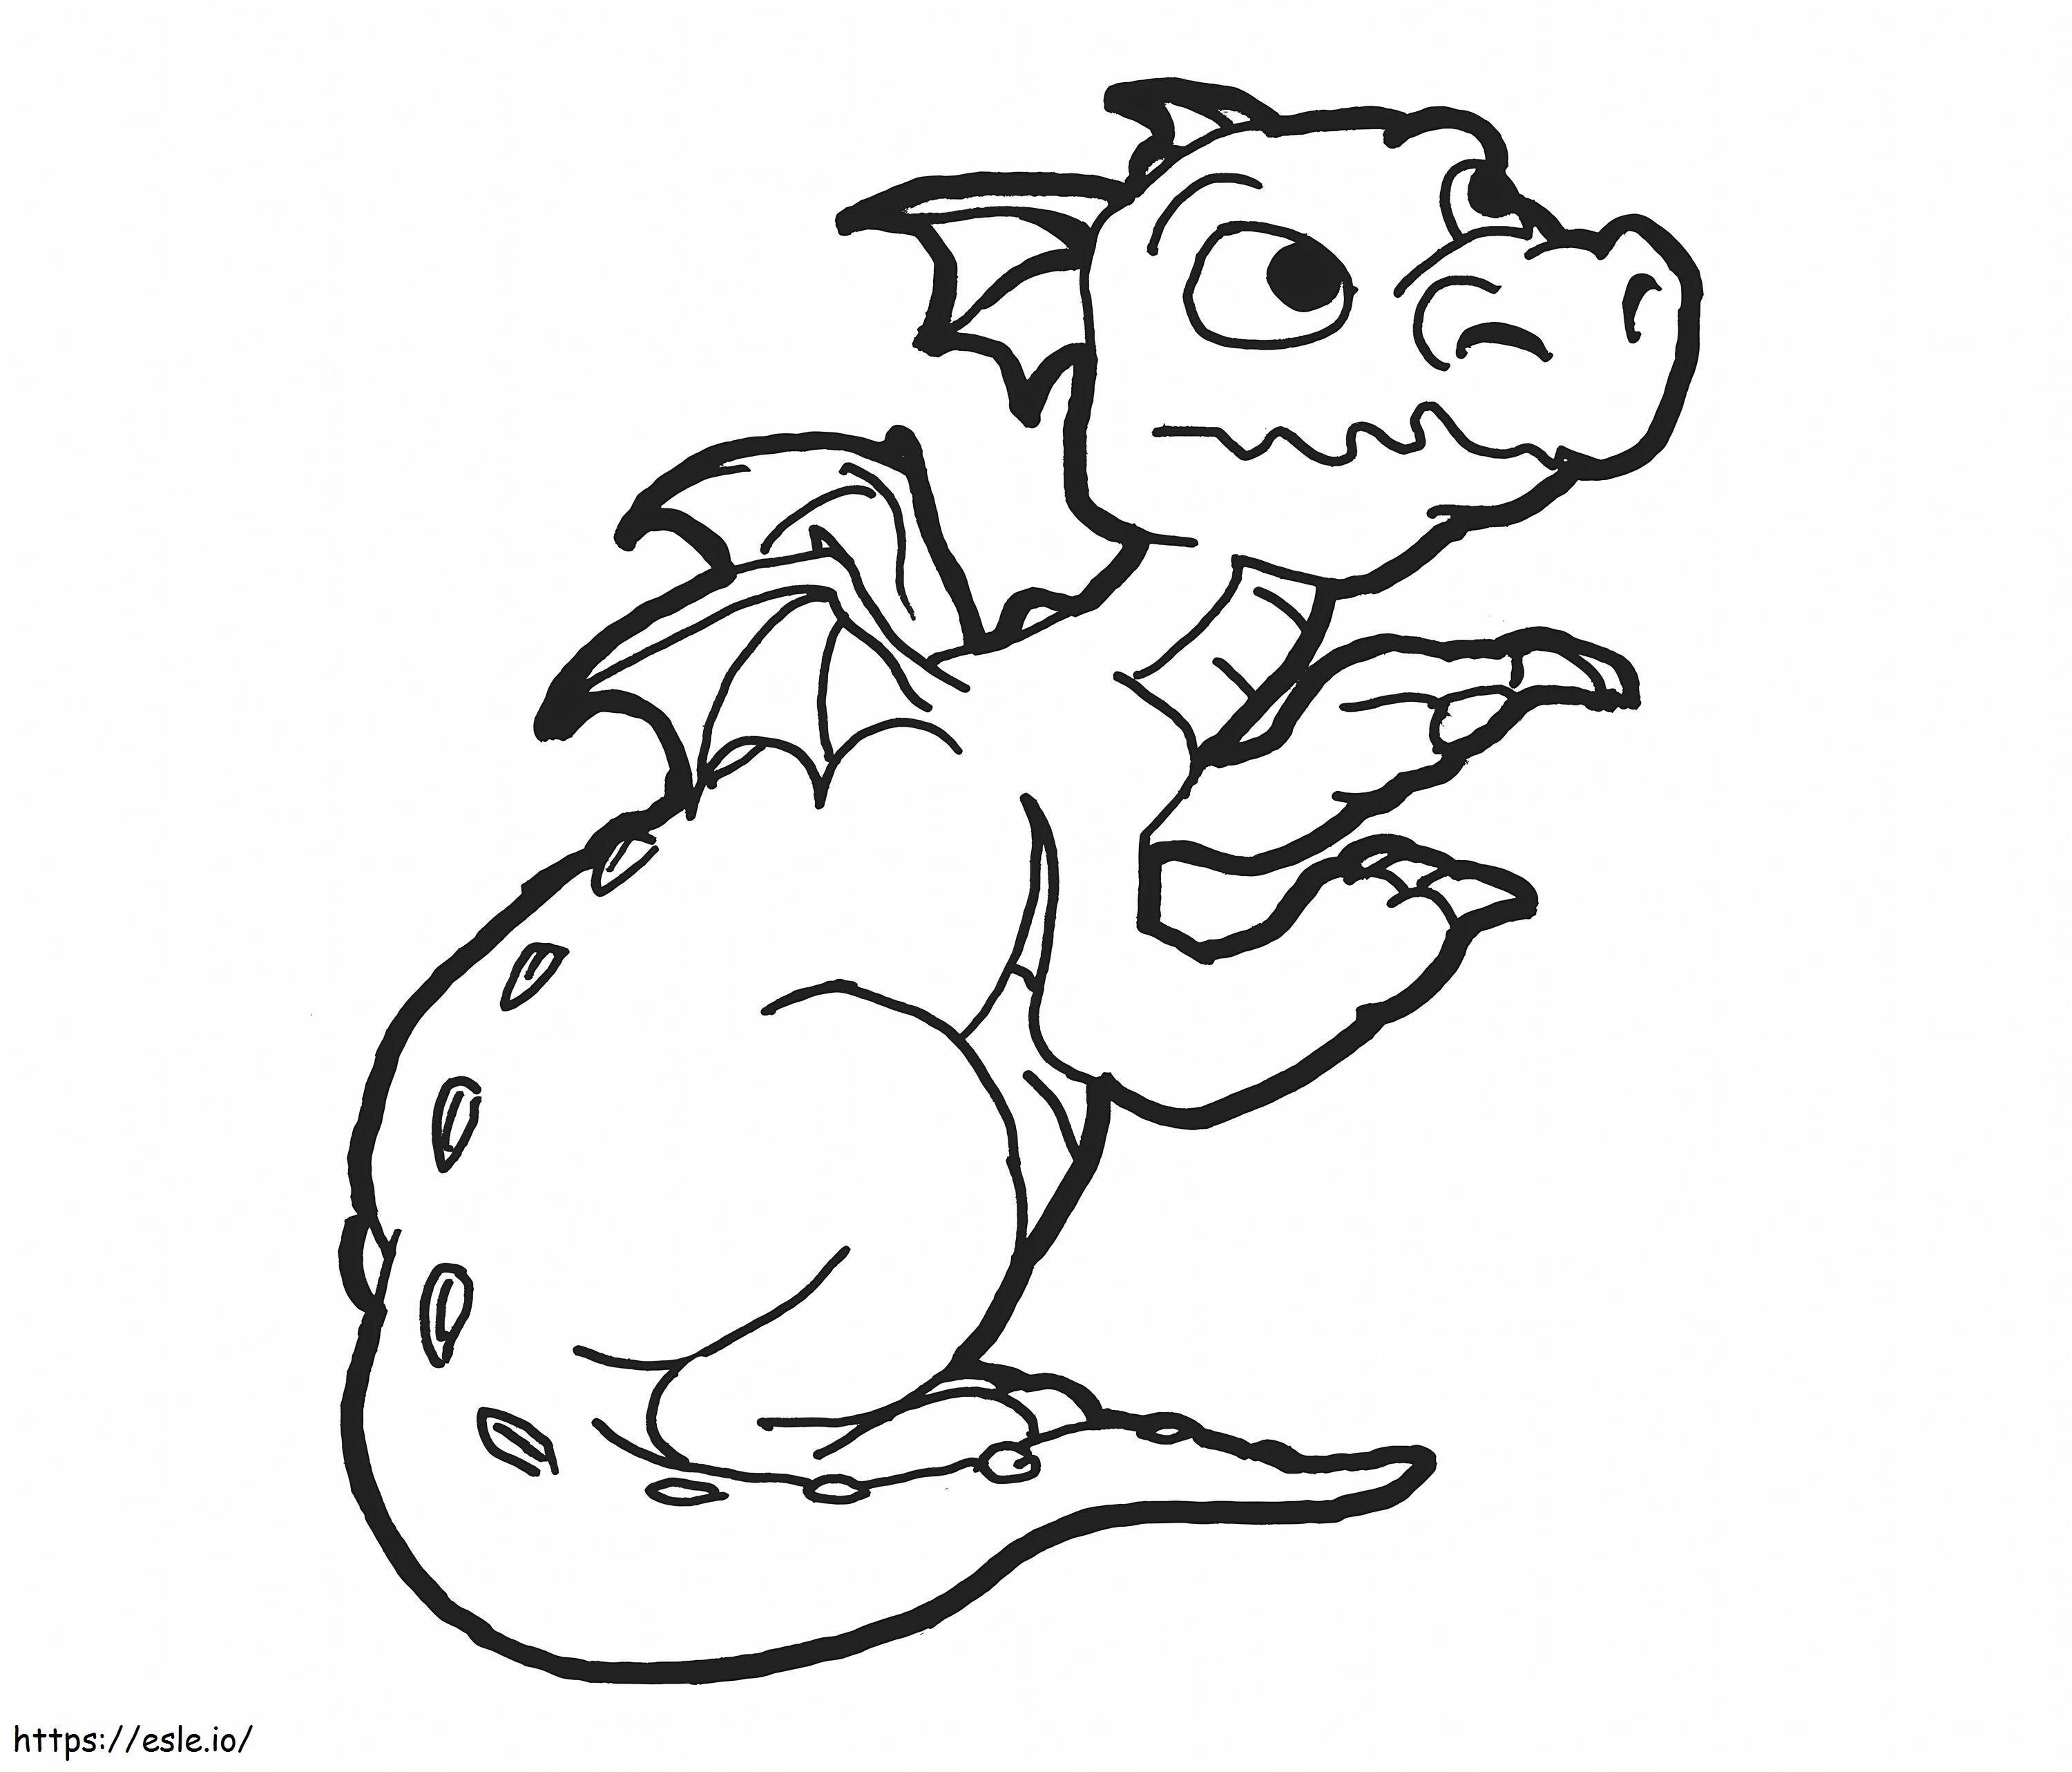 1526133783 Dragon A4 coloring page